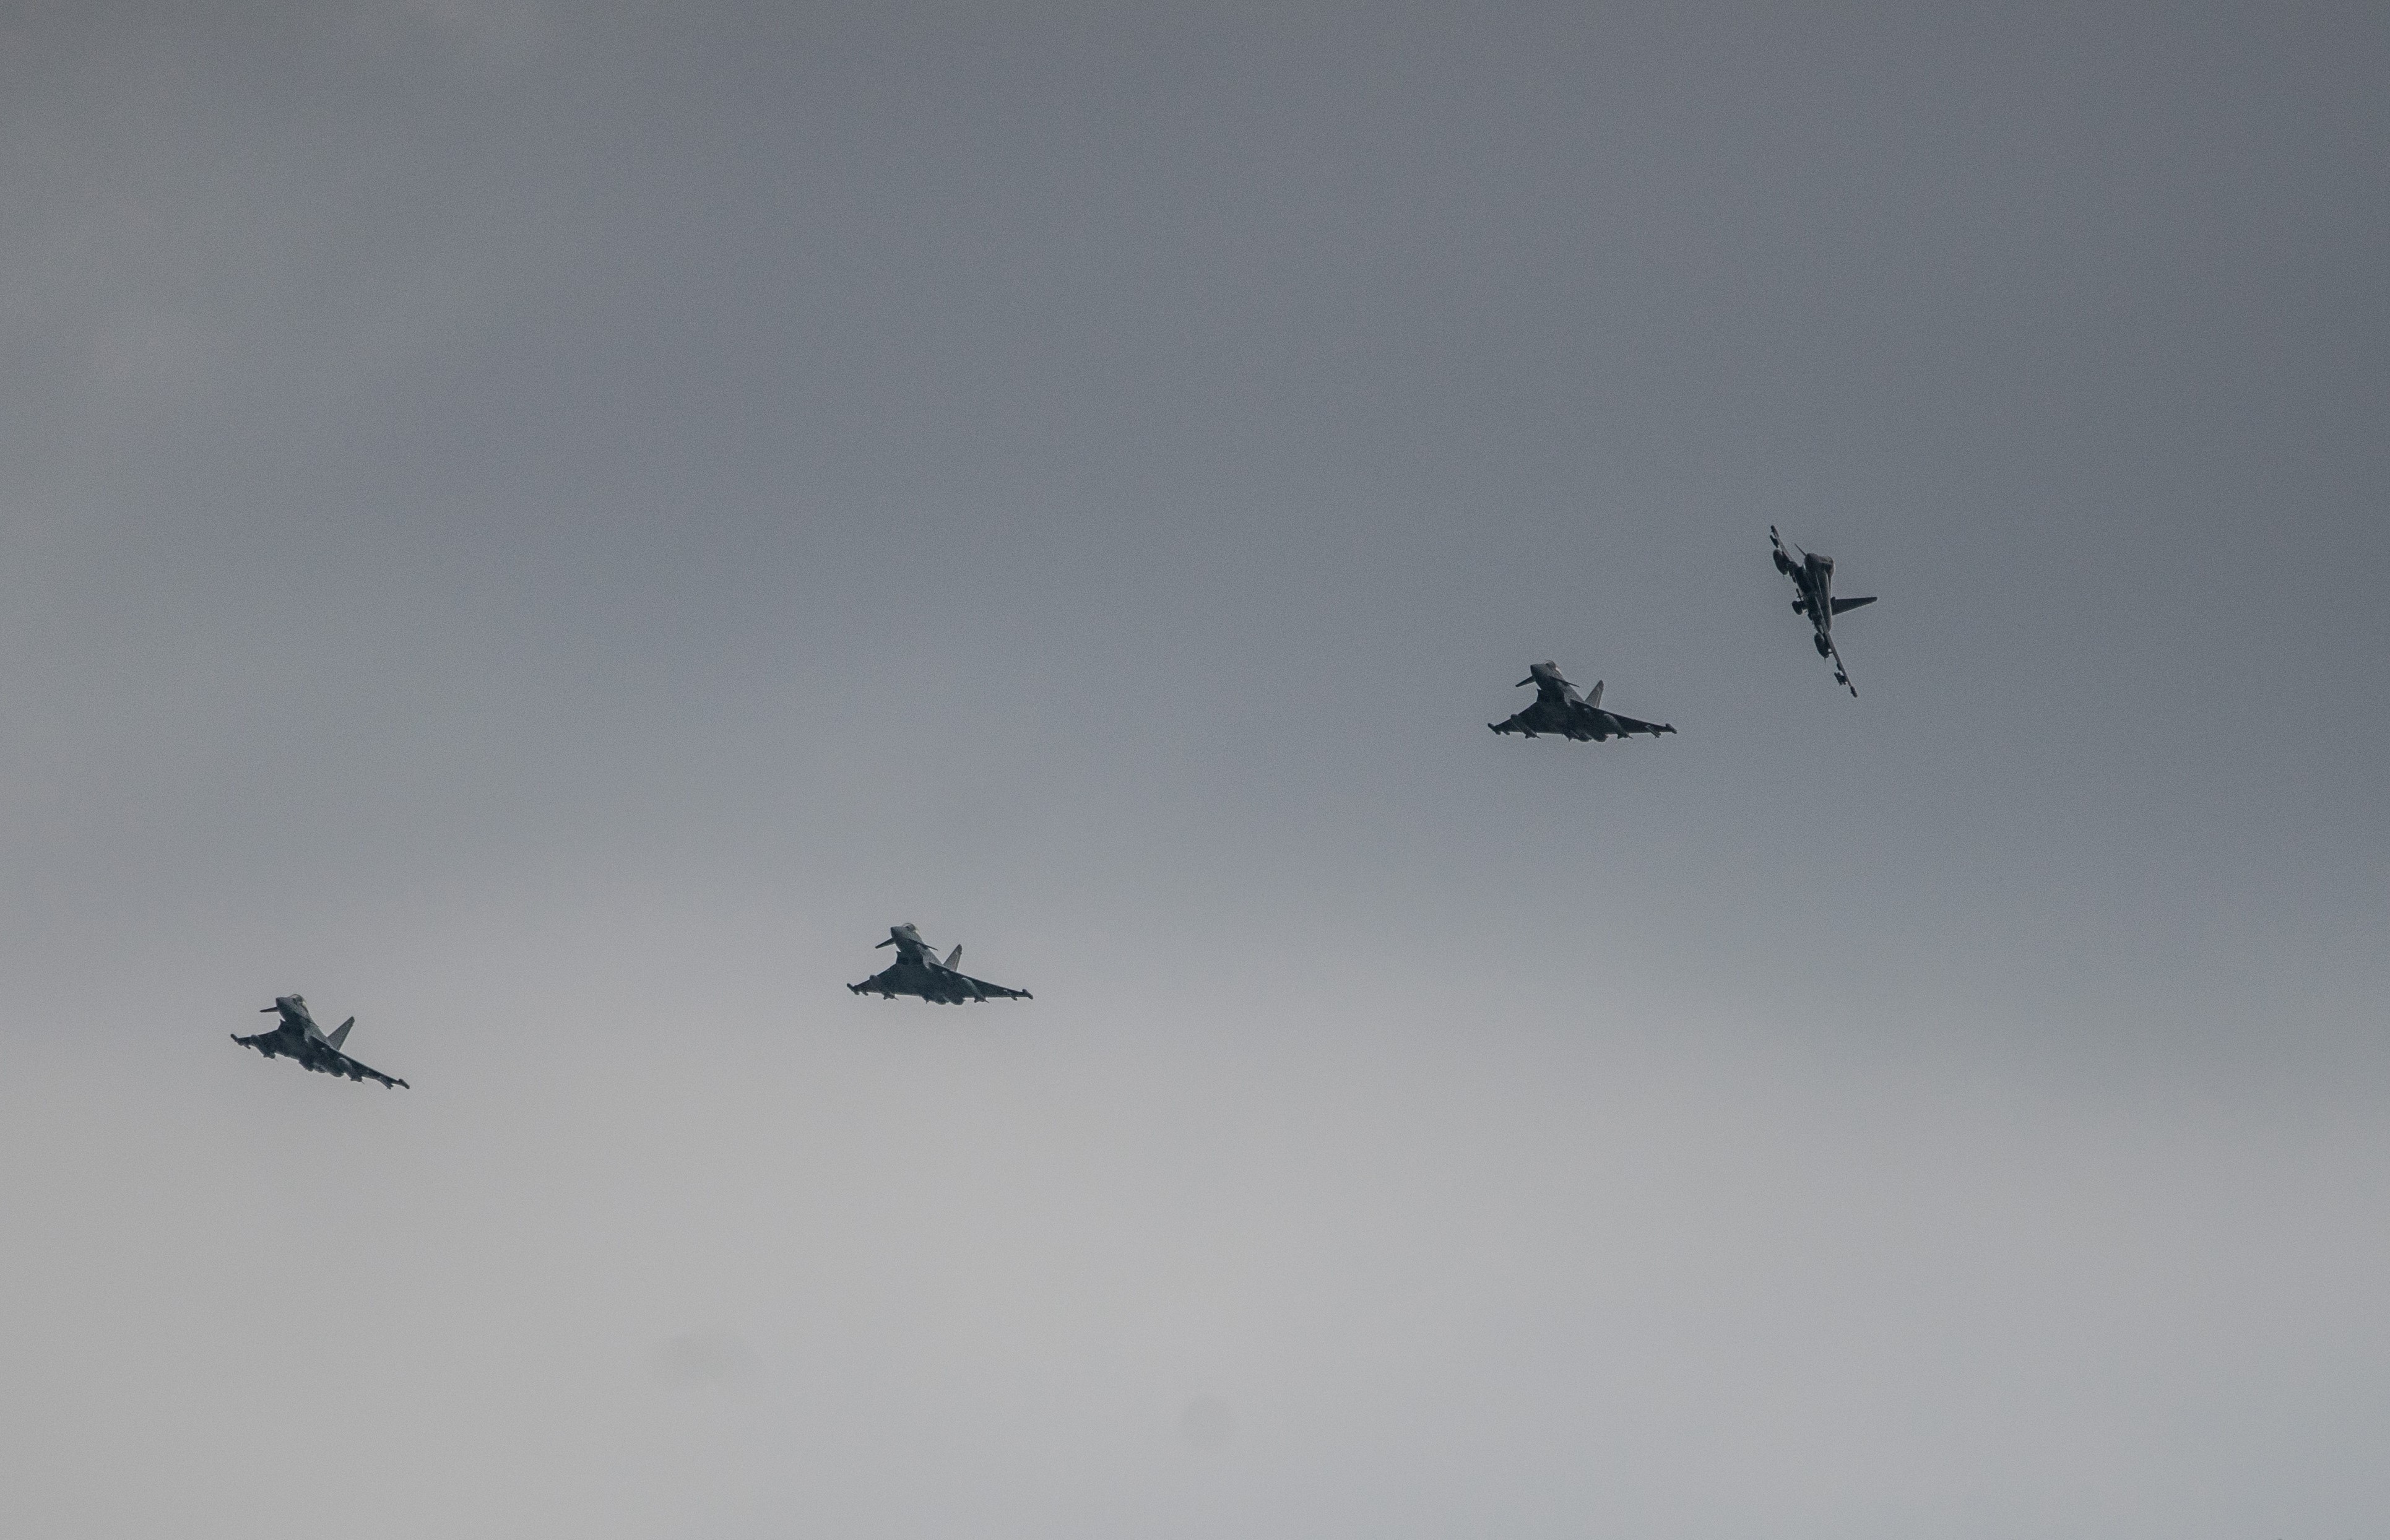 4 Typhoon aircraft flying in formation